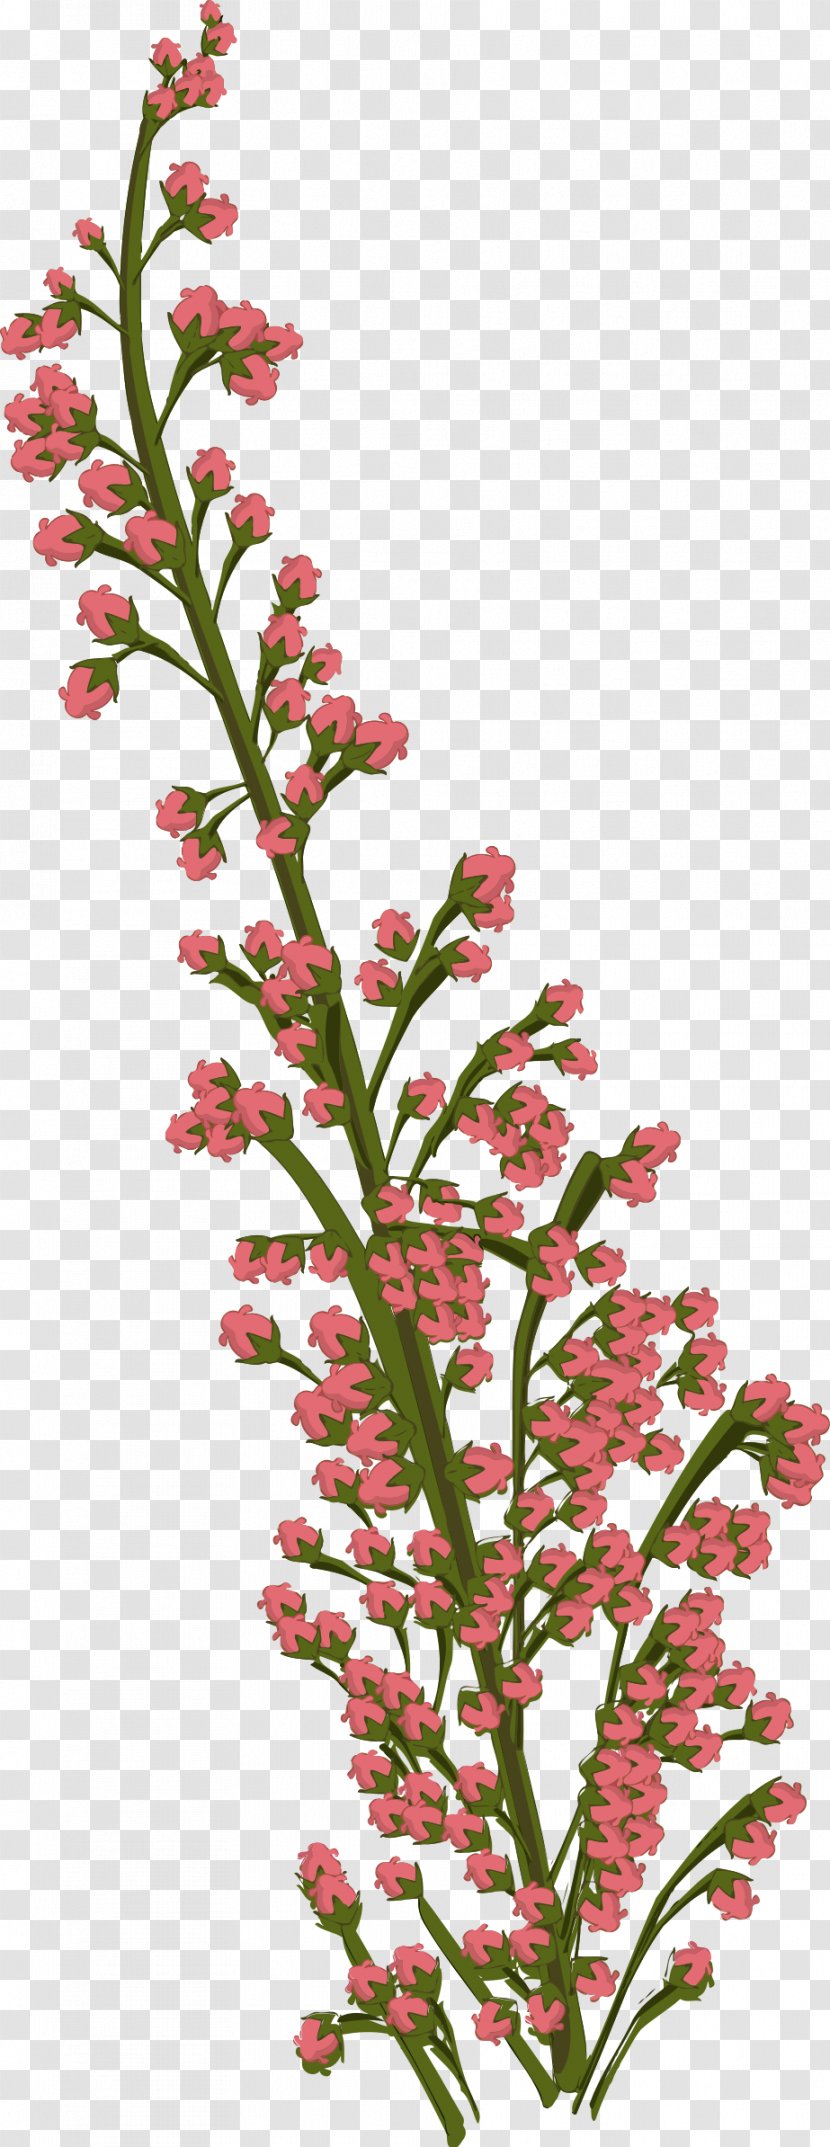 Drawing Tropical Flowers Cut - Smartweed Buckwheat Family - Flower Transparent PNG